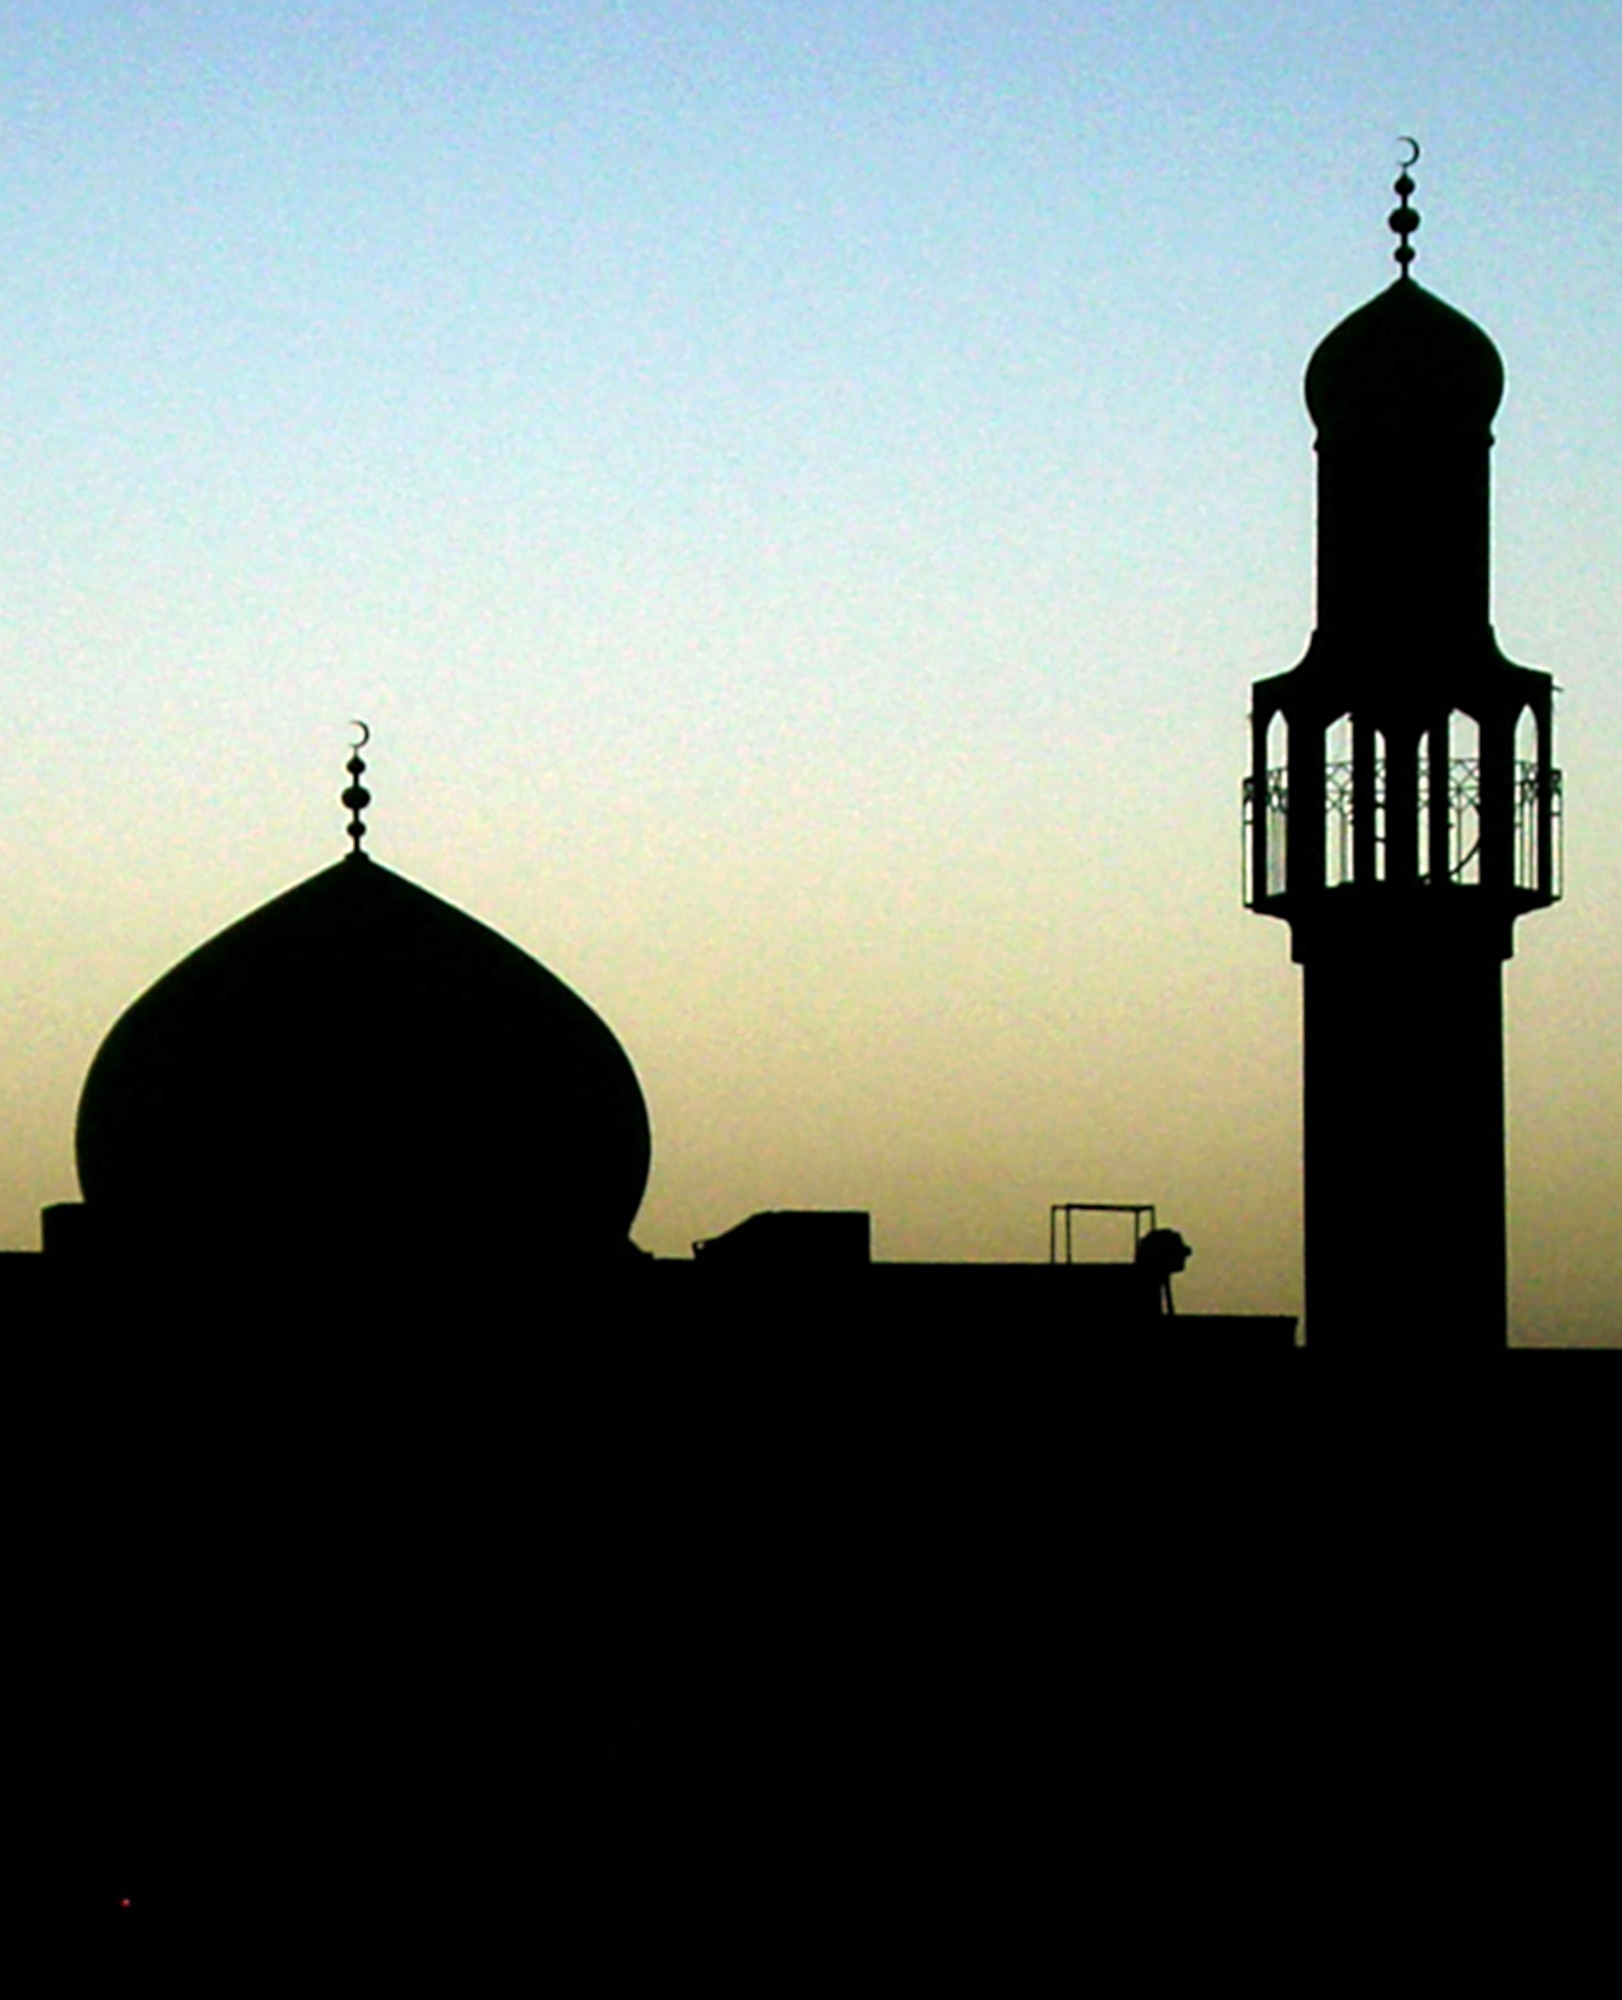 A mosque is silhouetted against the evening twilight near Balad, Iraq, May 29. Muslims will begin their Ramadan observance the evening of Sept. 1. The holiday marks the month that the Prophet Muhammed received the Qur'an from the archangel Gabriel and is observed through fasting throughout the day. (U.S. Army photo/Staff Sgt. Timothy Sander)